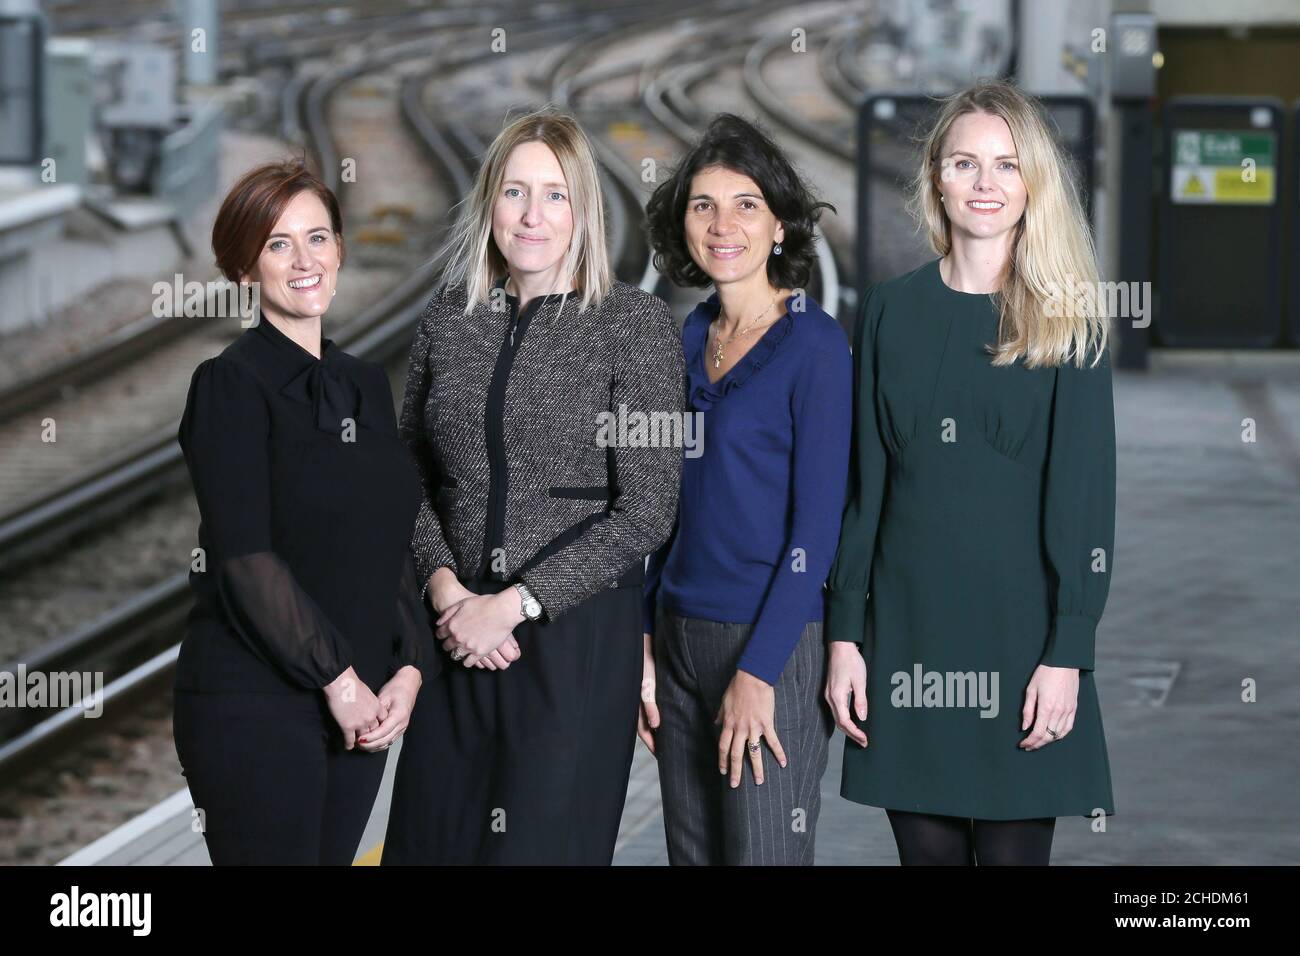 (Left to right) Southeastern's commercial director Diane Burke, train services director Ellie Burrows, finance and contract director Elodie Brian and head of communications Alison Nolan at London Bridge station, as the firm has launched a campaign to encourage women to pursue a career in the rail industry. Stock Photo